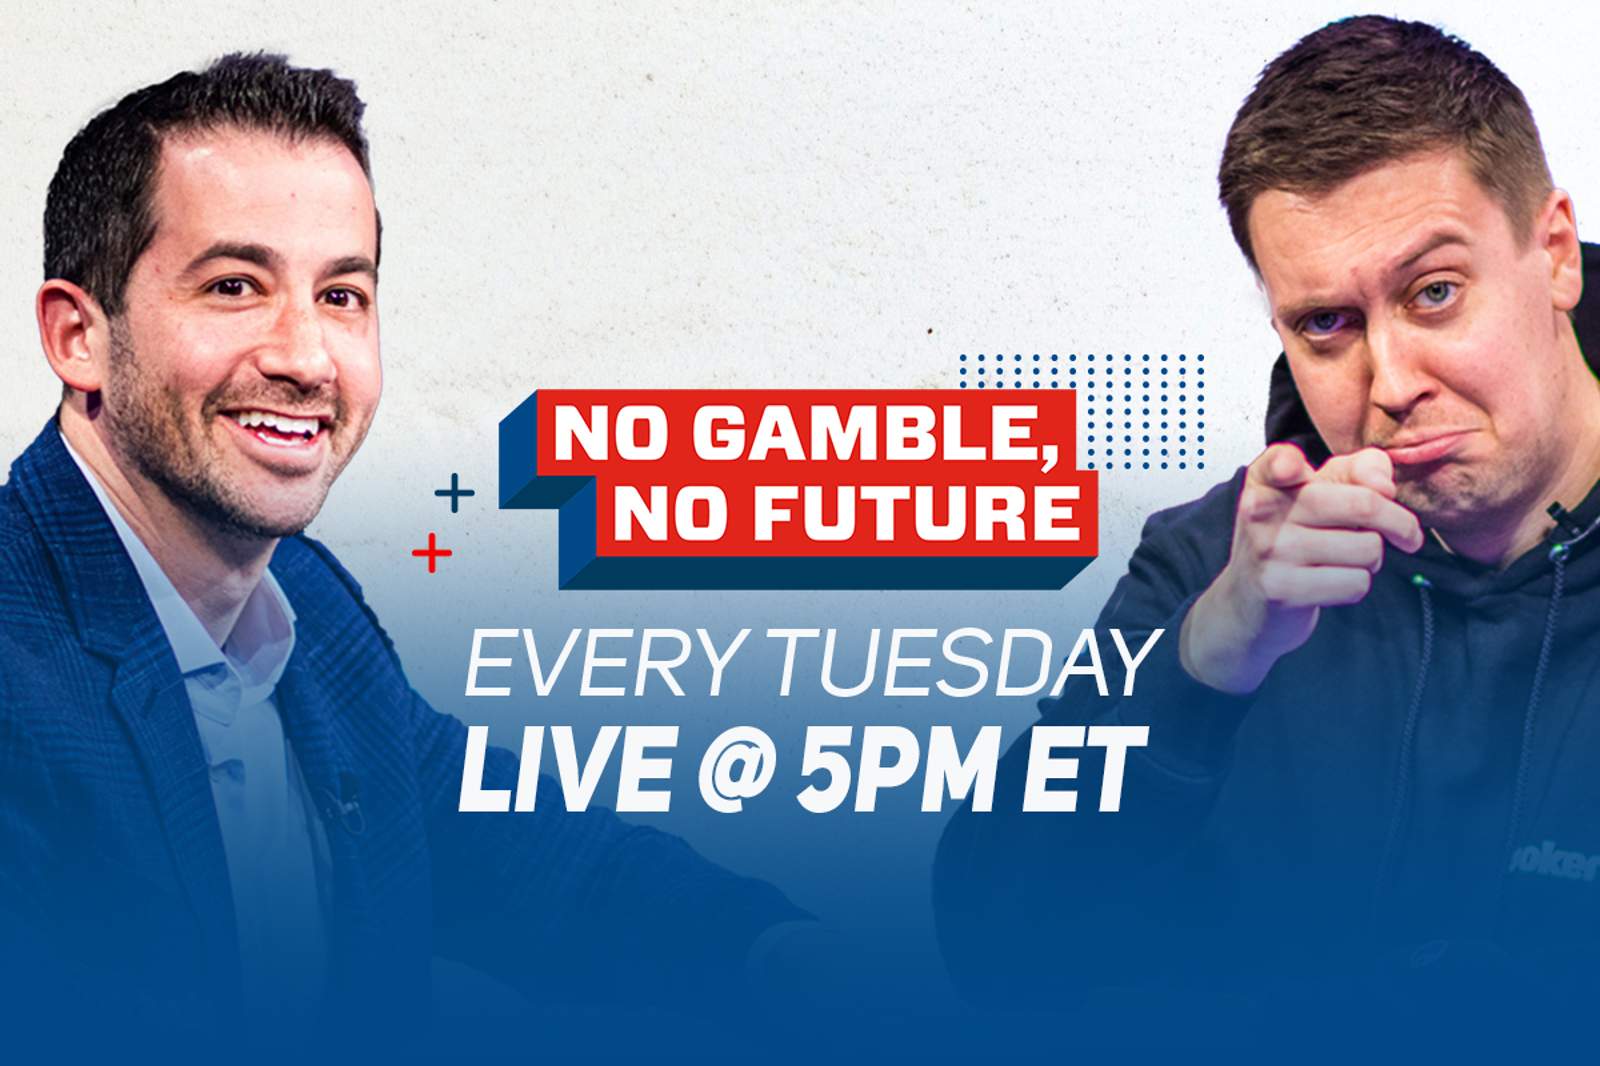 No Gamble, No Future Episode 19 on Today at 5 p.m. ET with Phil Hellmuth's Next Opponent